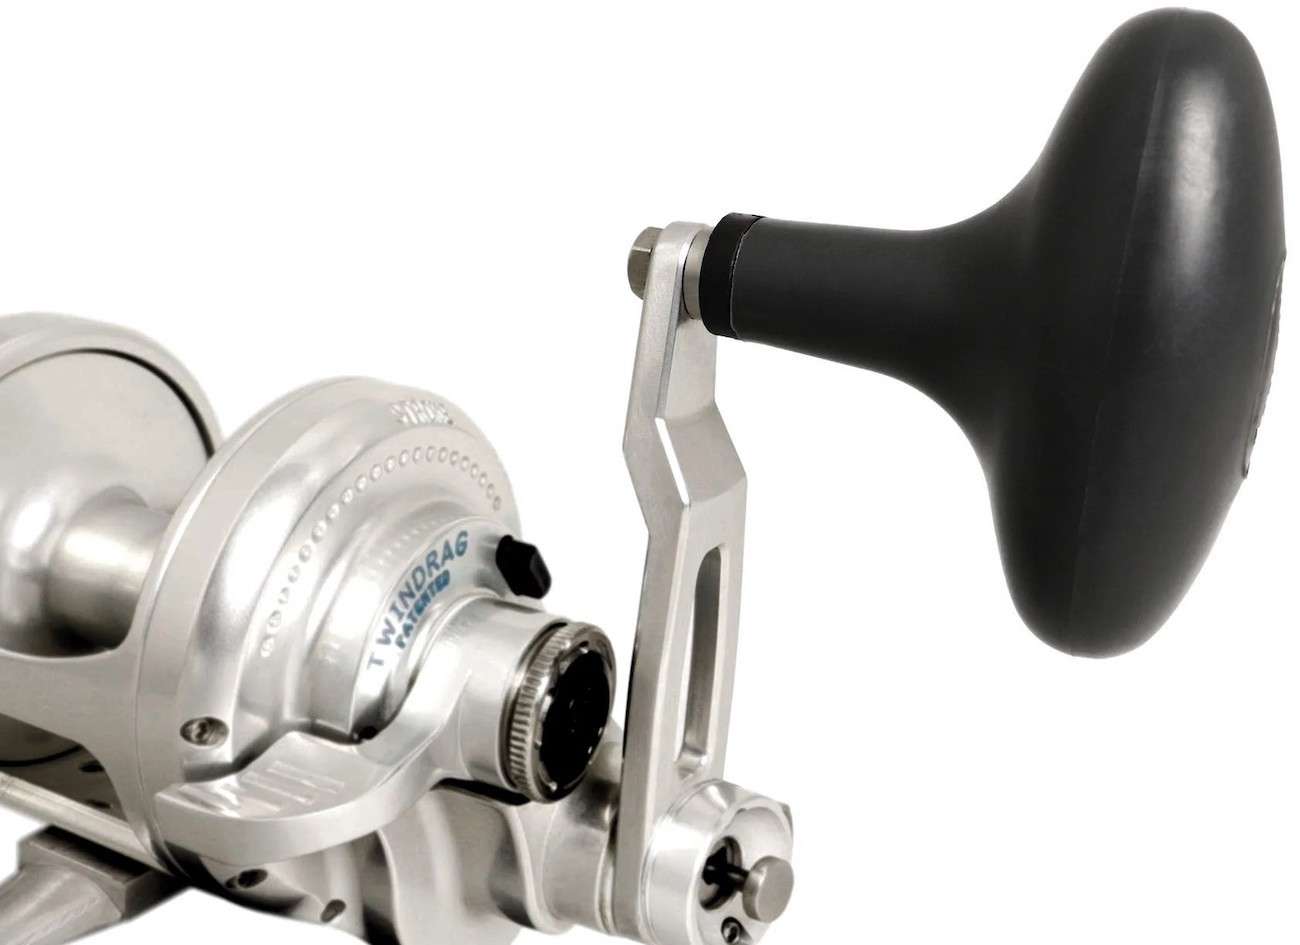 Accurate BX2-50-S Boss Extreme 2-Speed Reel